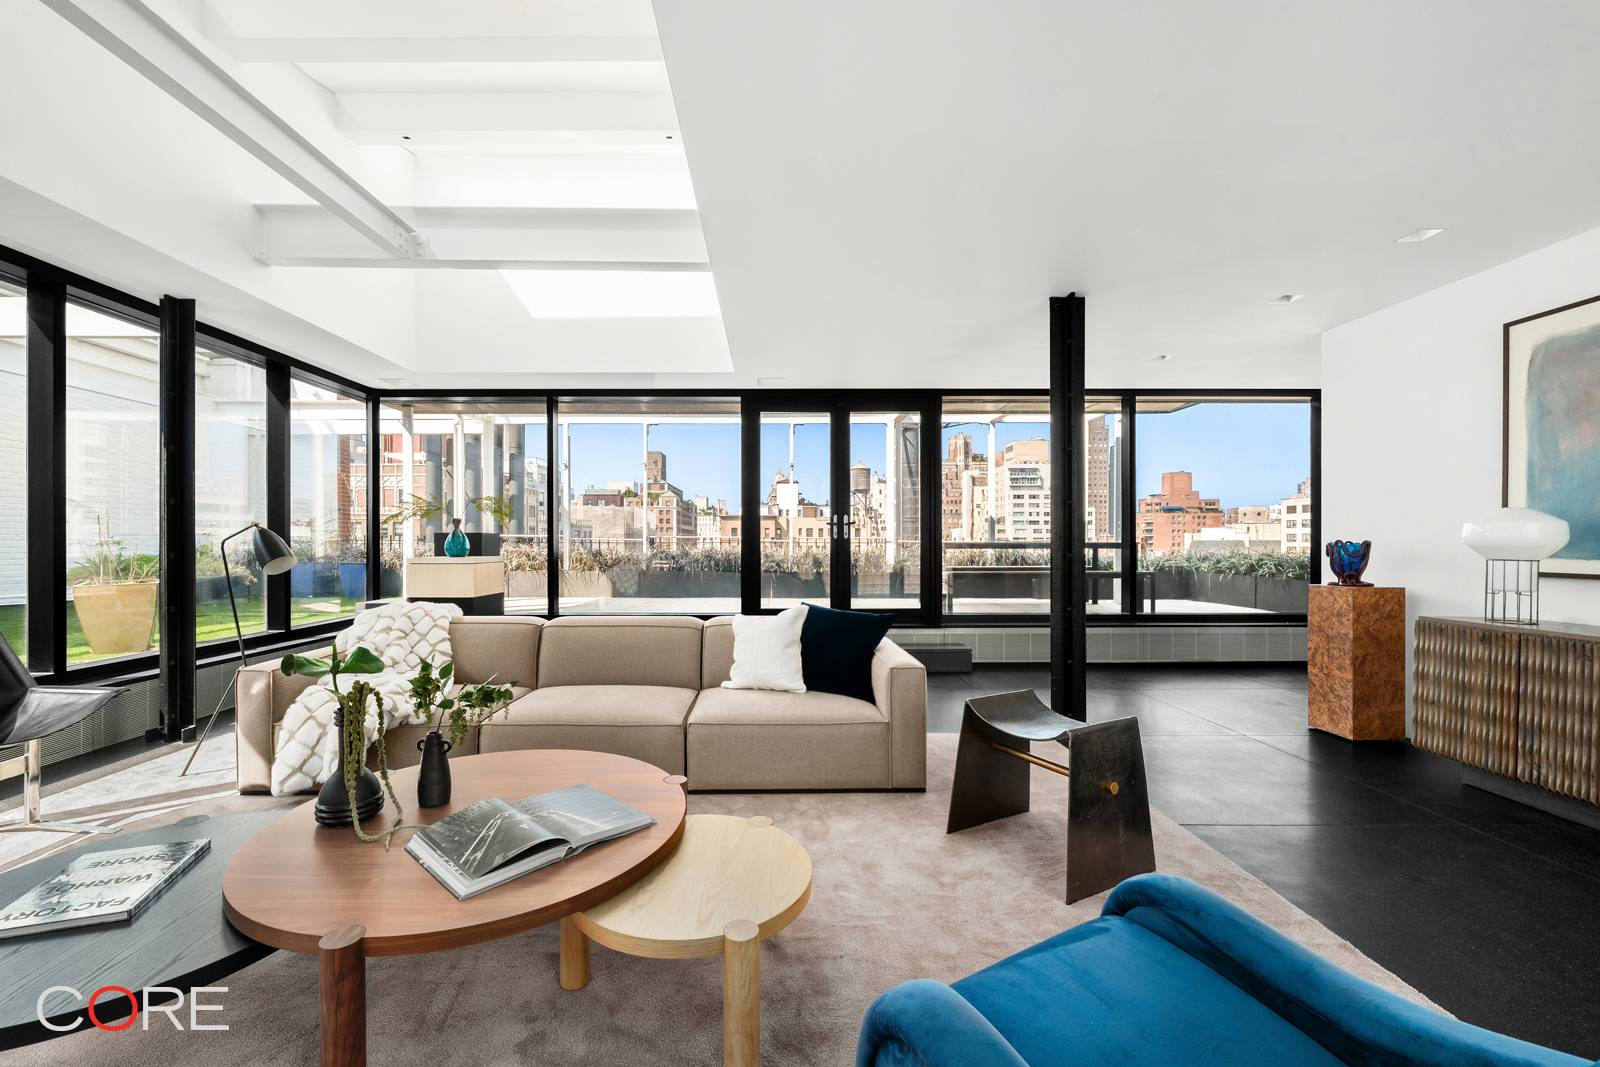 Introducing the penthouse at 45 East 66th Street an exquisite private modern duplex showcasing spectacular outdoor space !